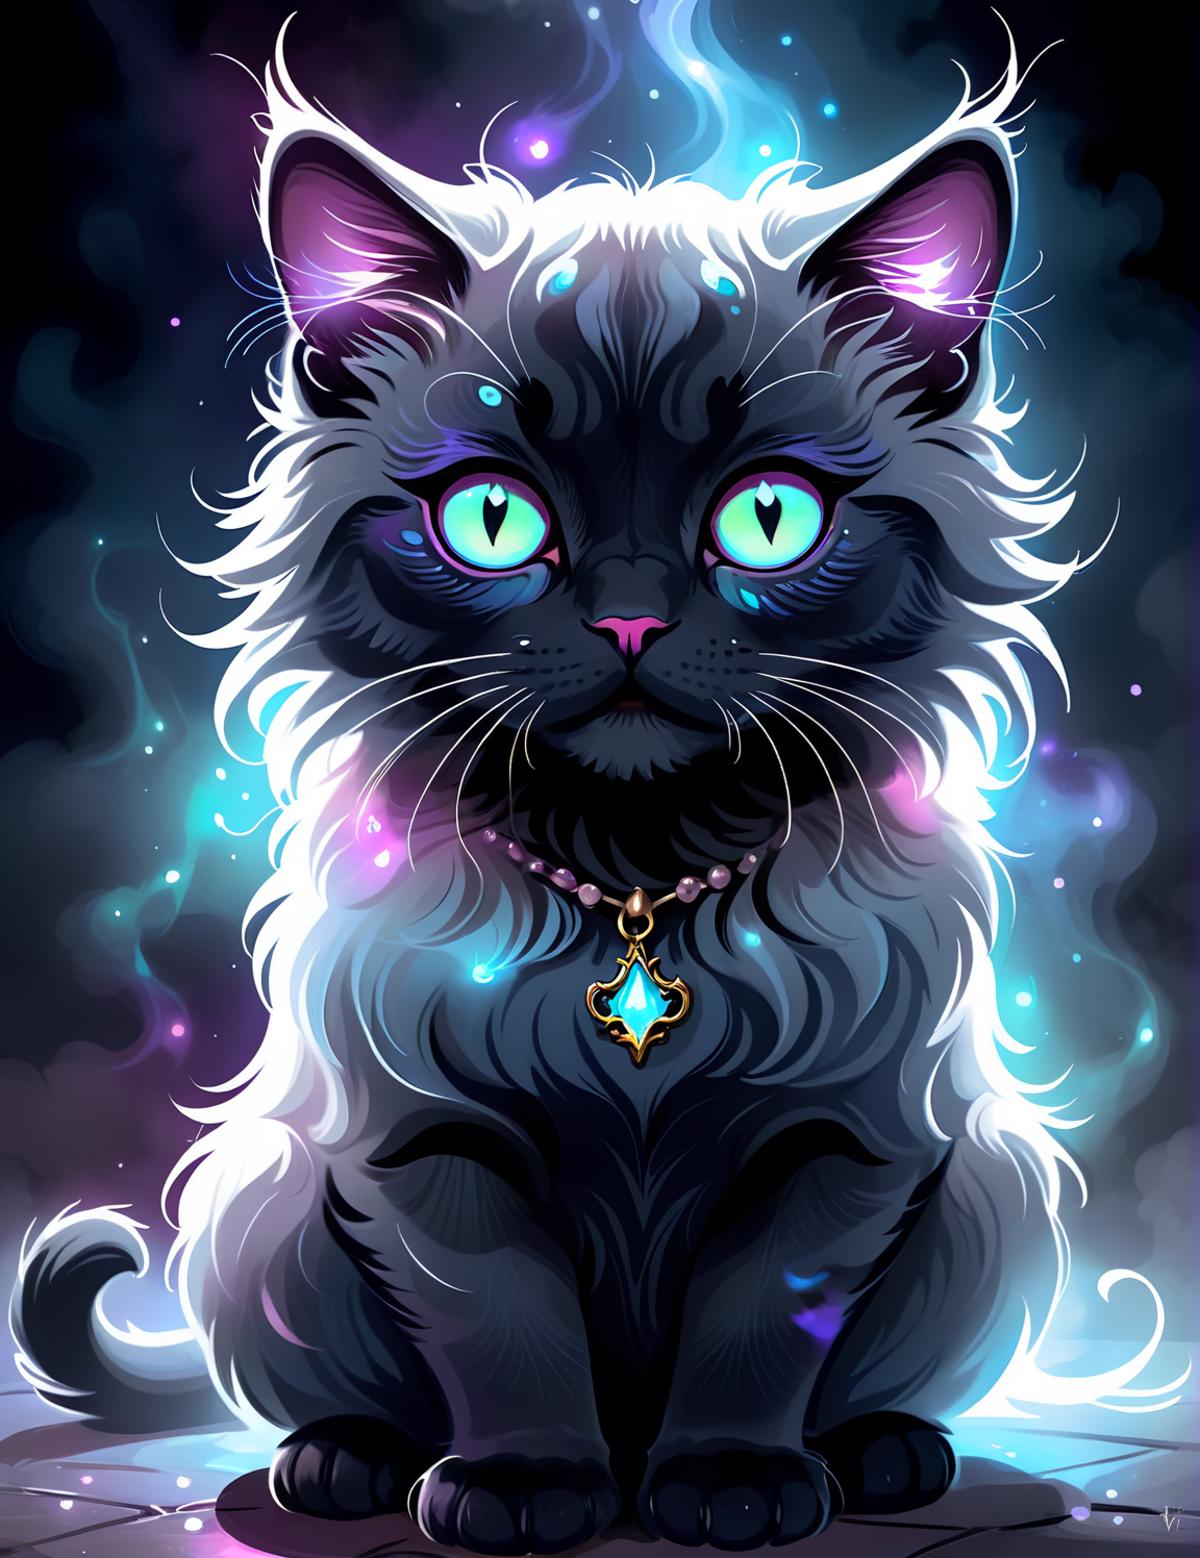 A black long-haired cat with blue eyes and a bell around its neck.